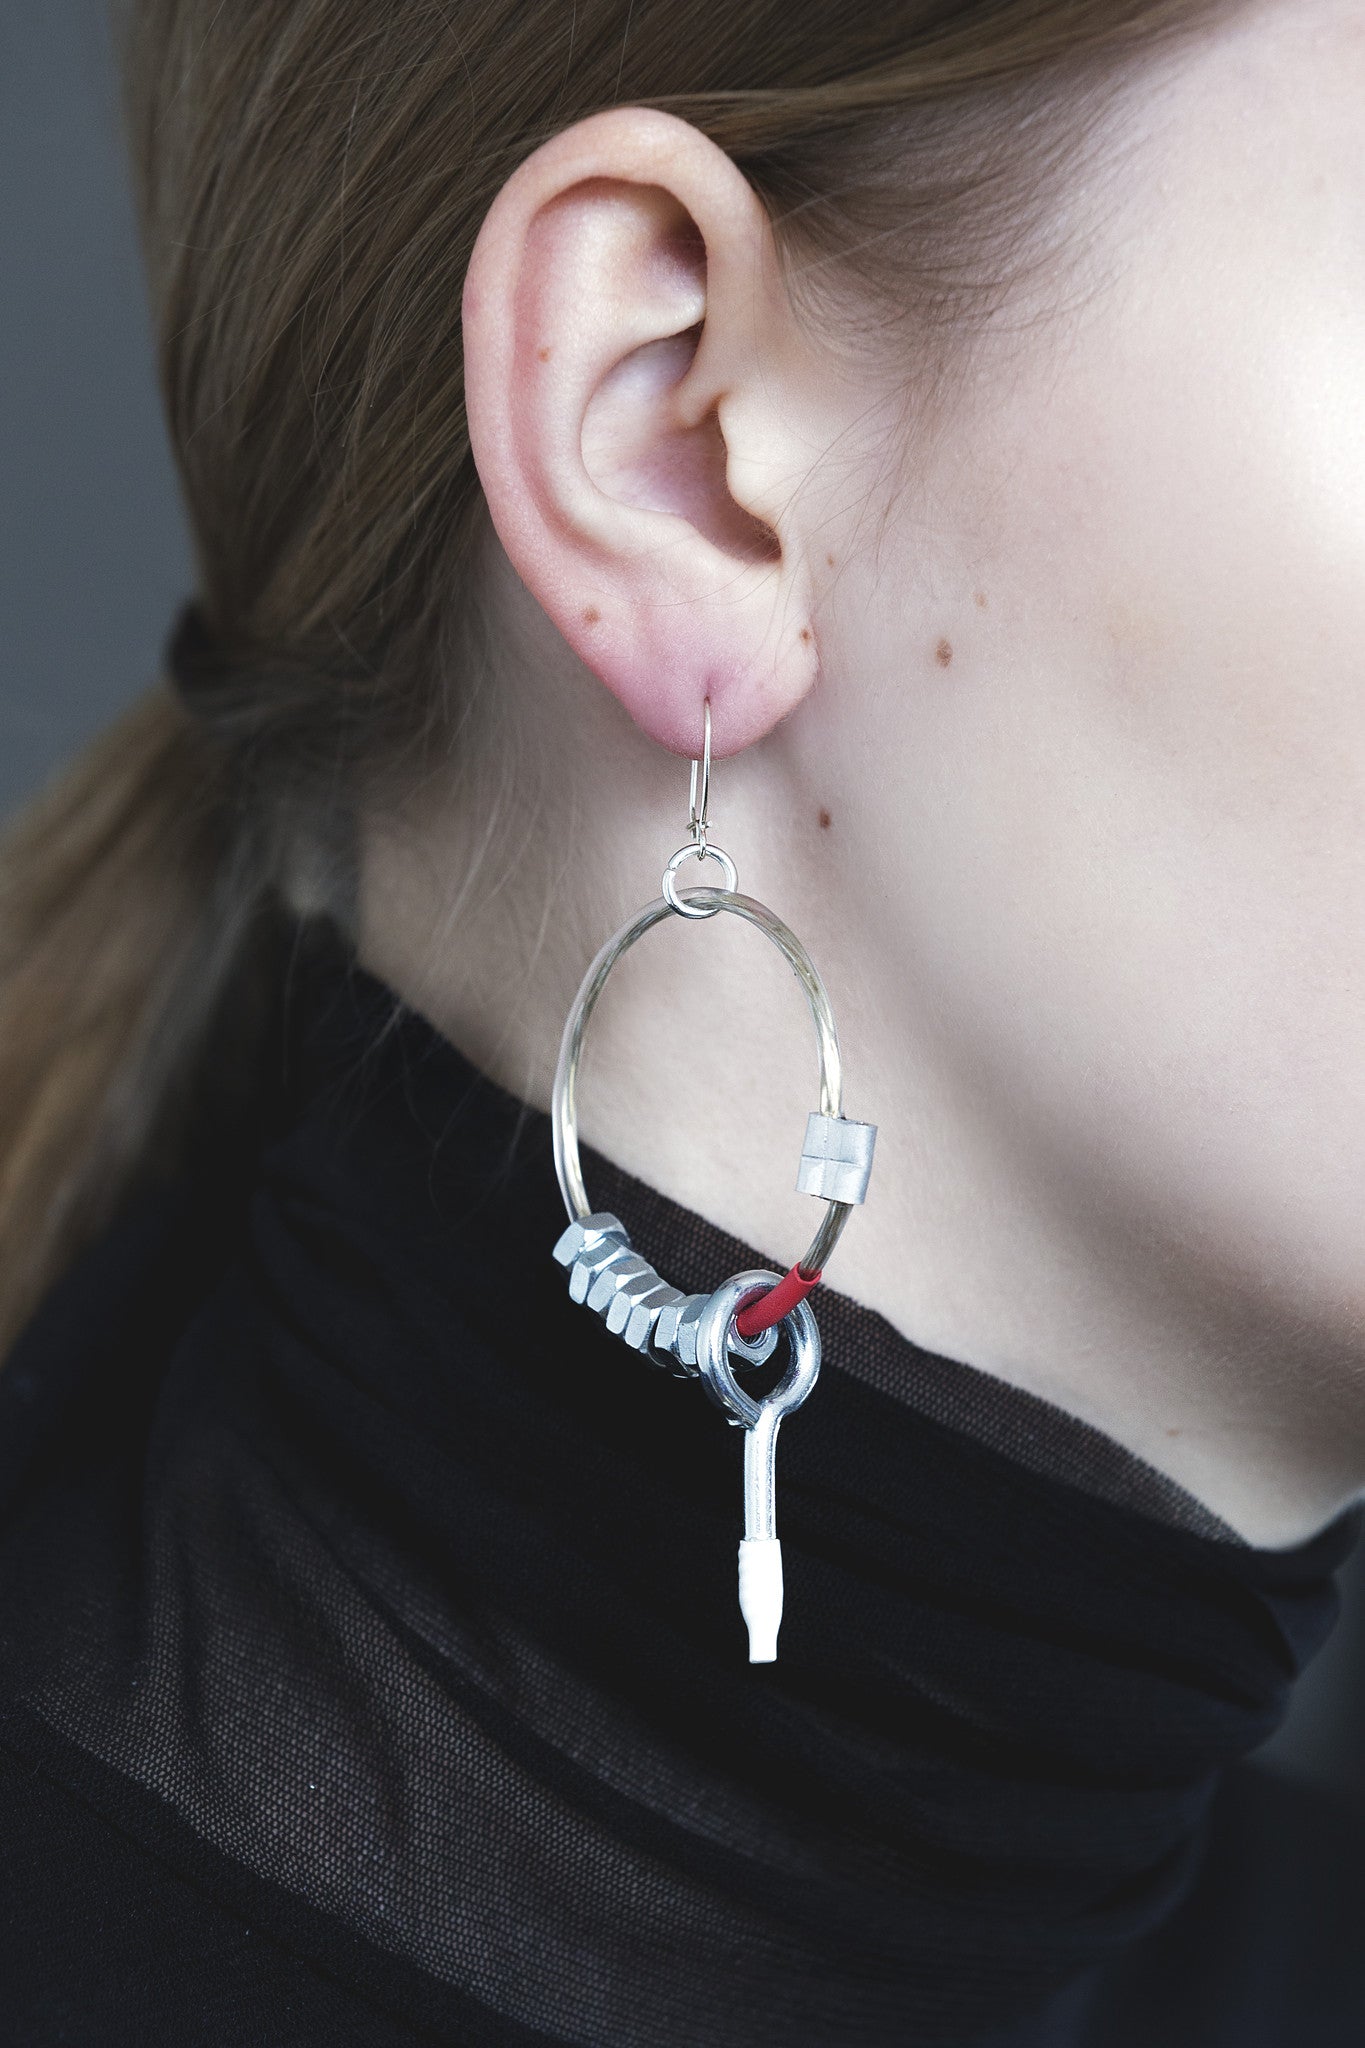 earrings with metal details and silver pins